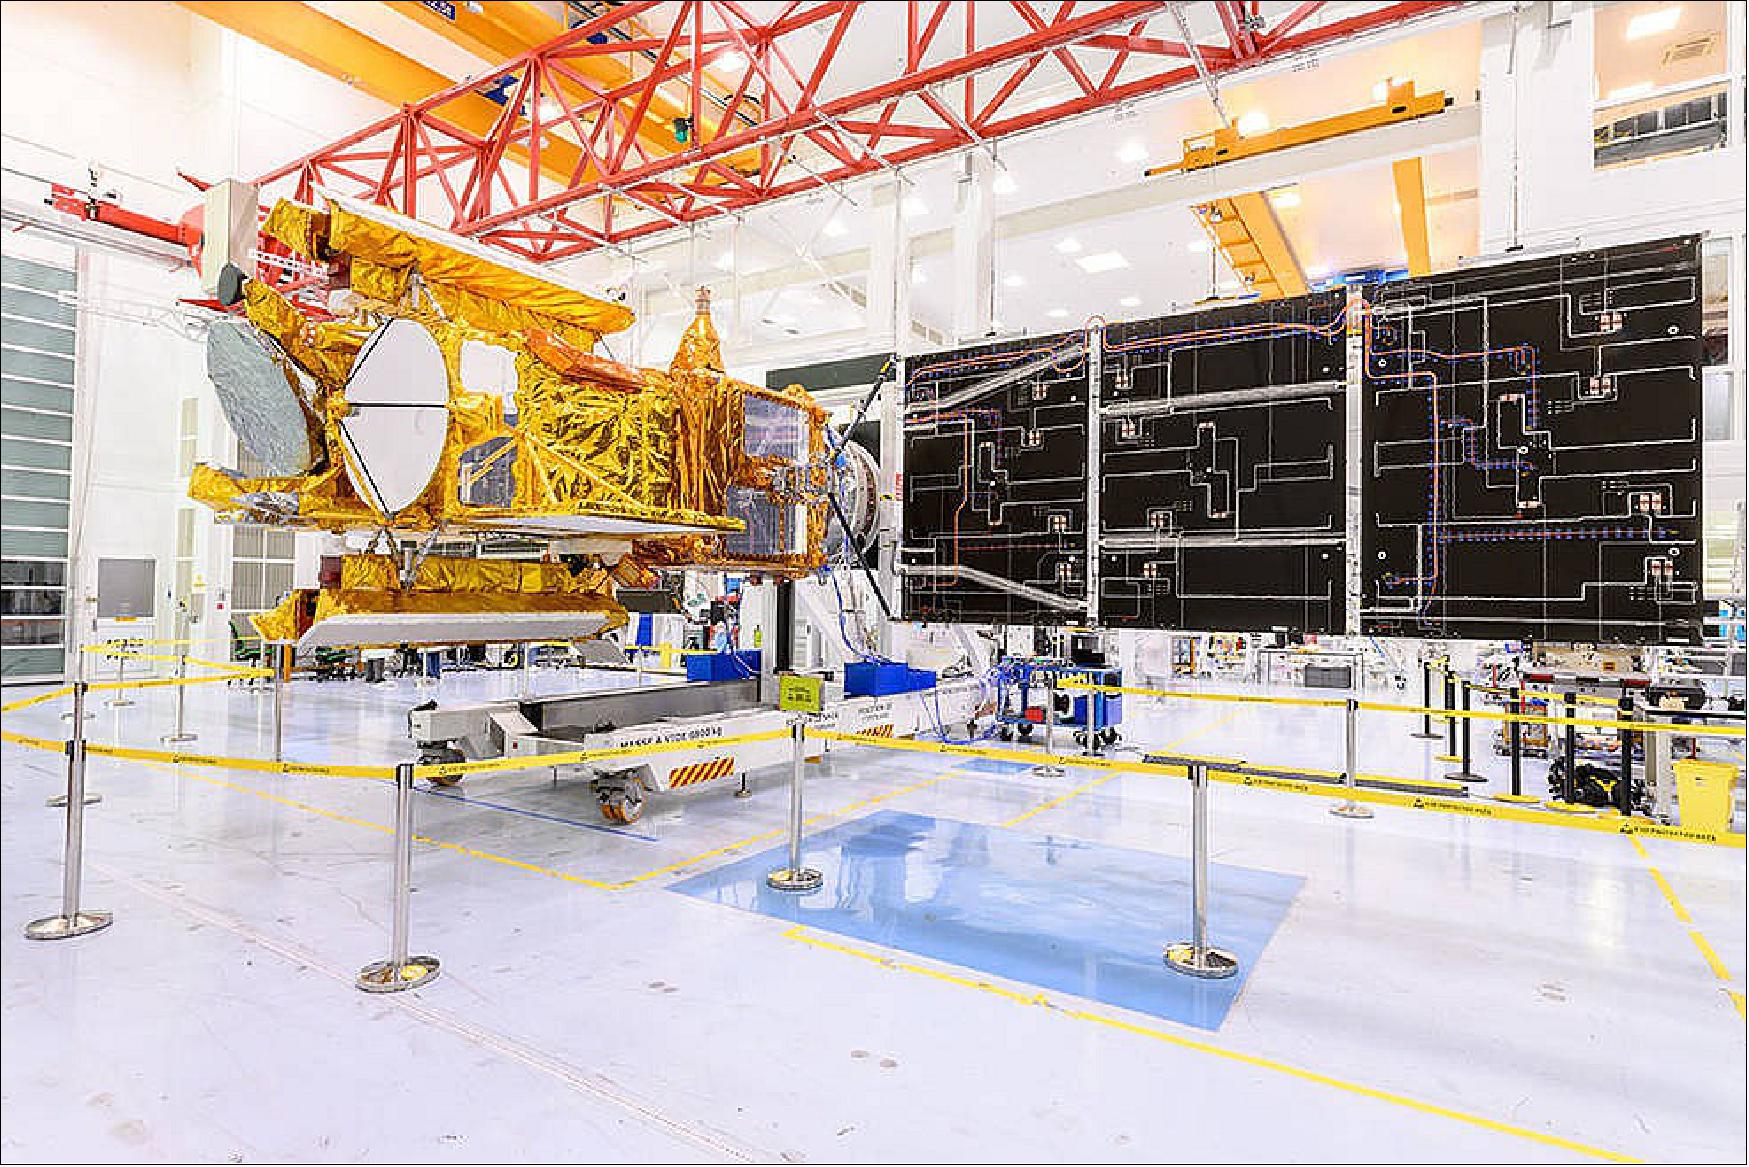 Figure 41: SWOT’s solar panels unfold as part of a test in January at a Thales Alenia Space facility in Cannes, France, where the satellite is being assembled. SWOT will measure elevations of Earth’s ocean and surface water, giving researchers information with an unprecedented level of detail (image credits: CNES/Thales Alenia Space)